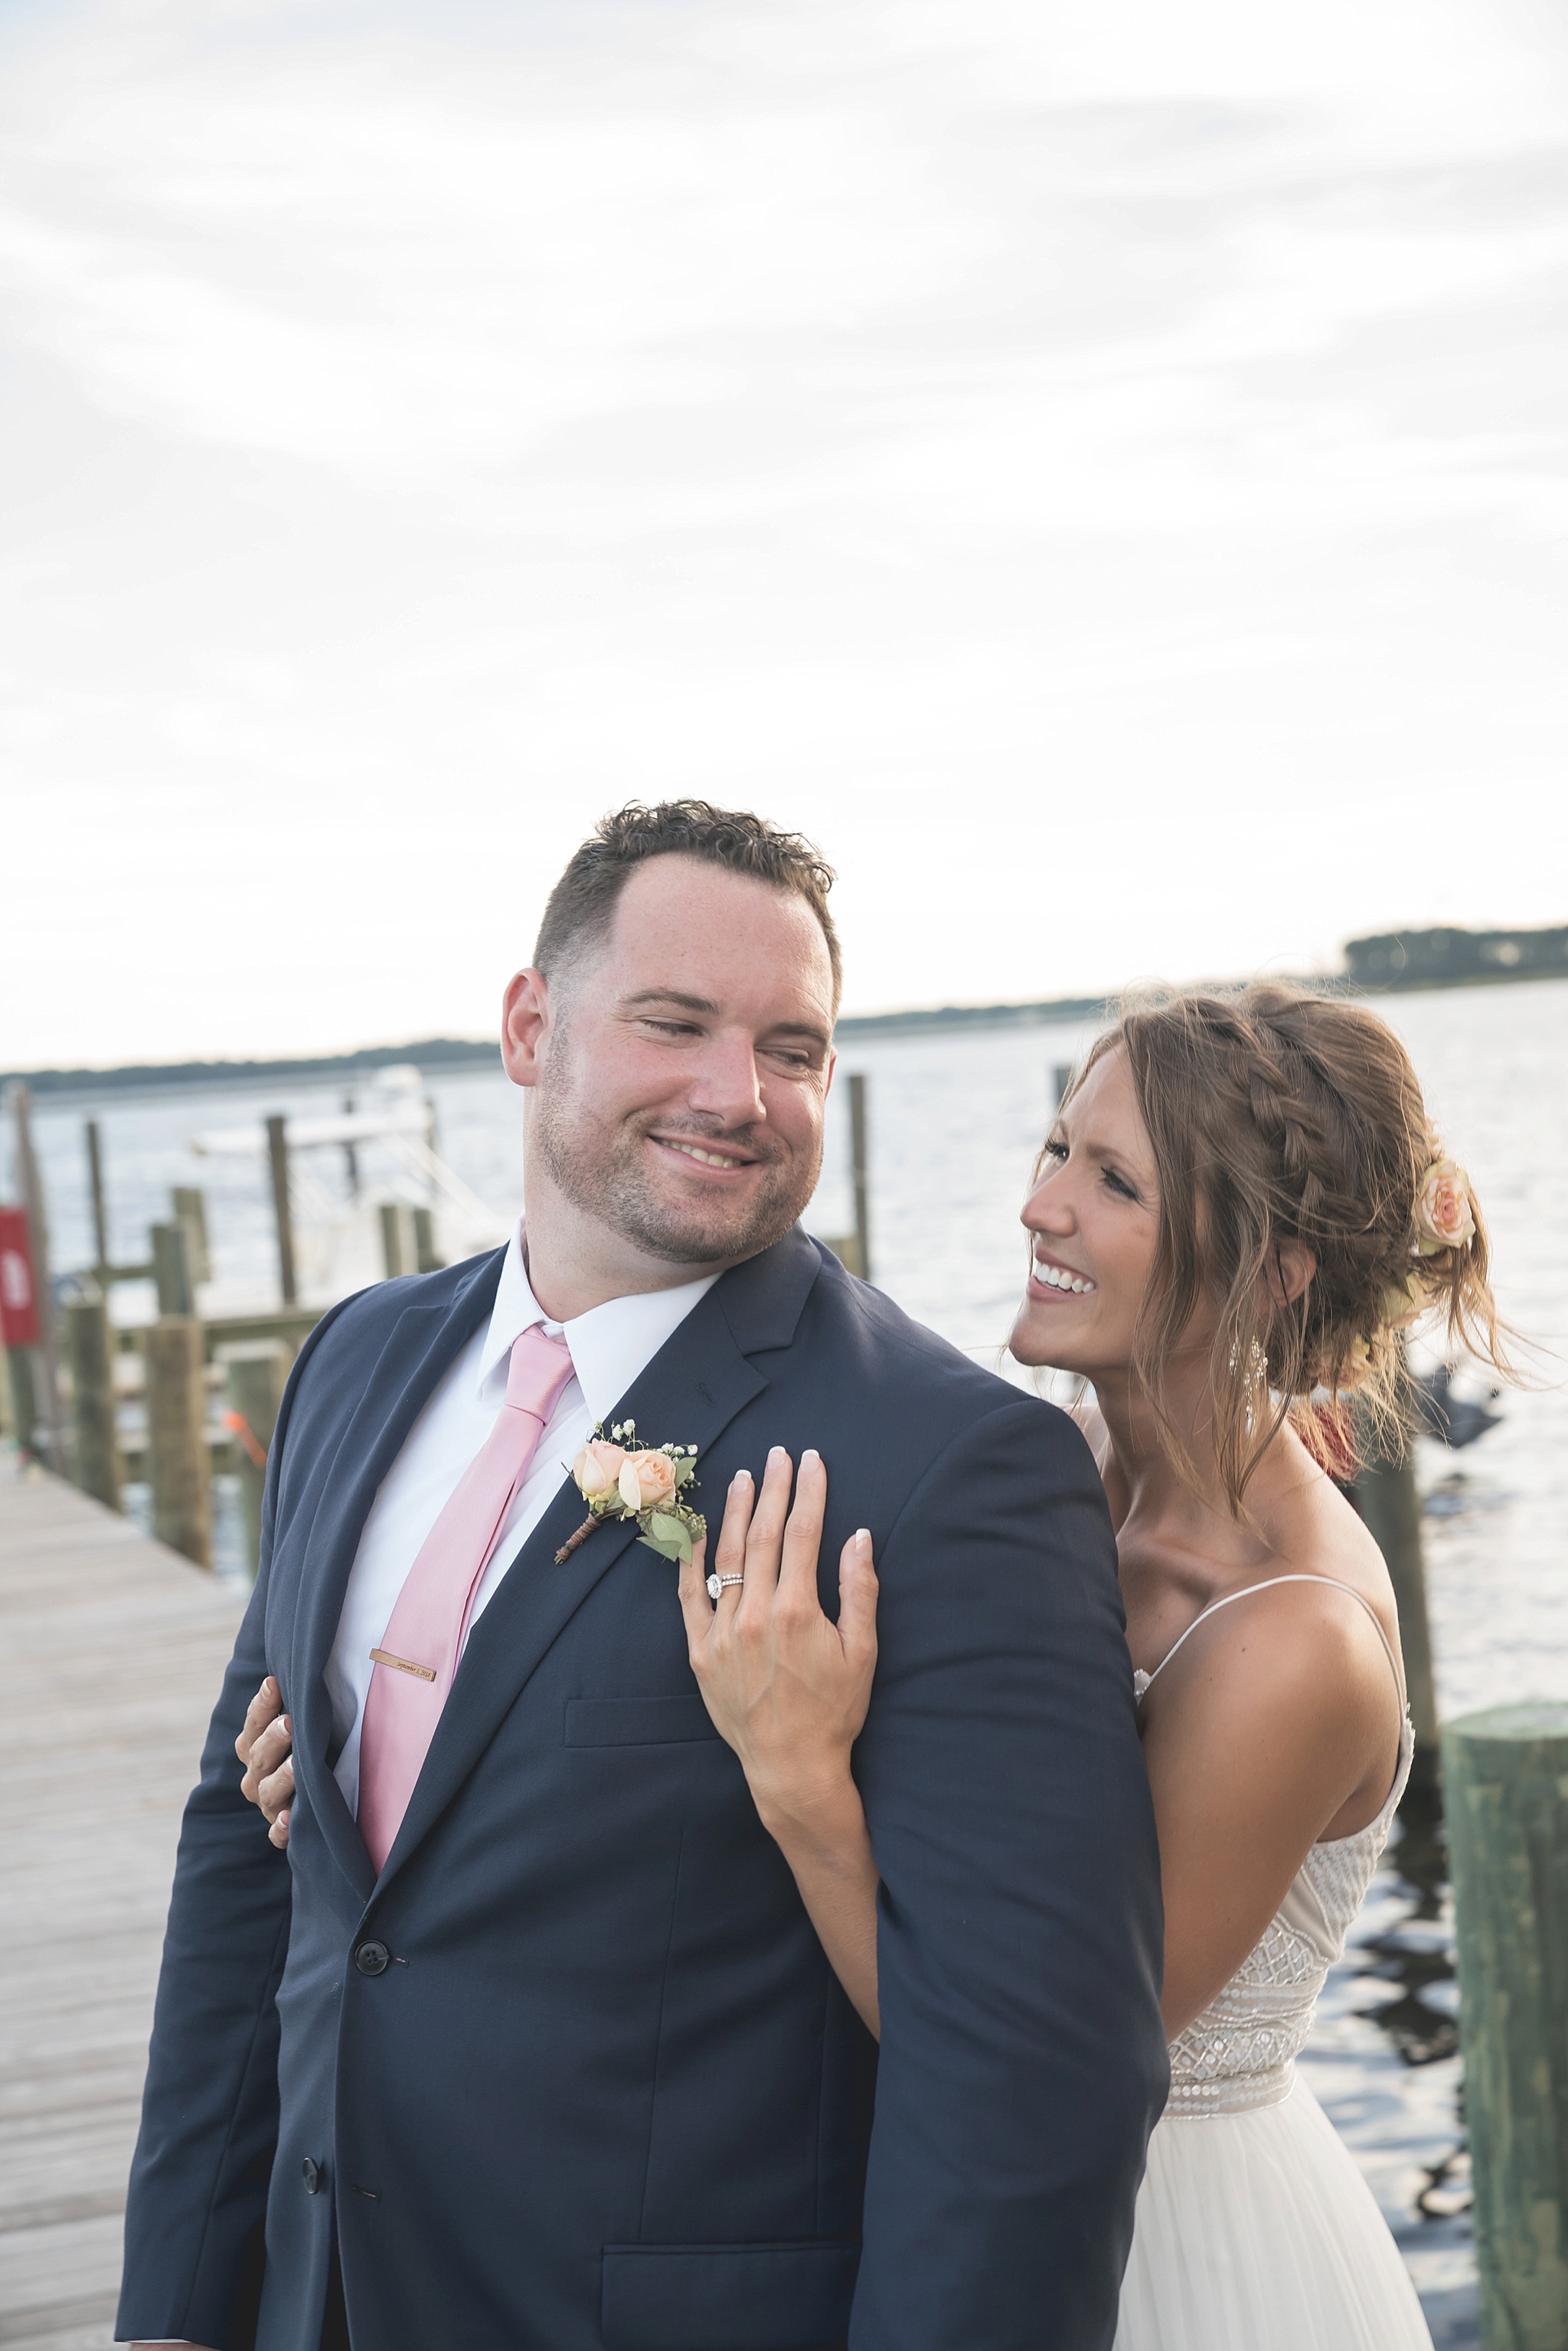 Stephanie Kyle River Forest Manor Wedding Preview Belhaven Nc Photographer Will Greene Photo Video